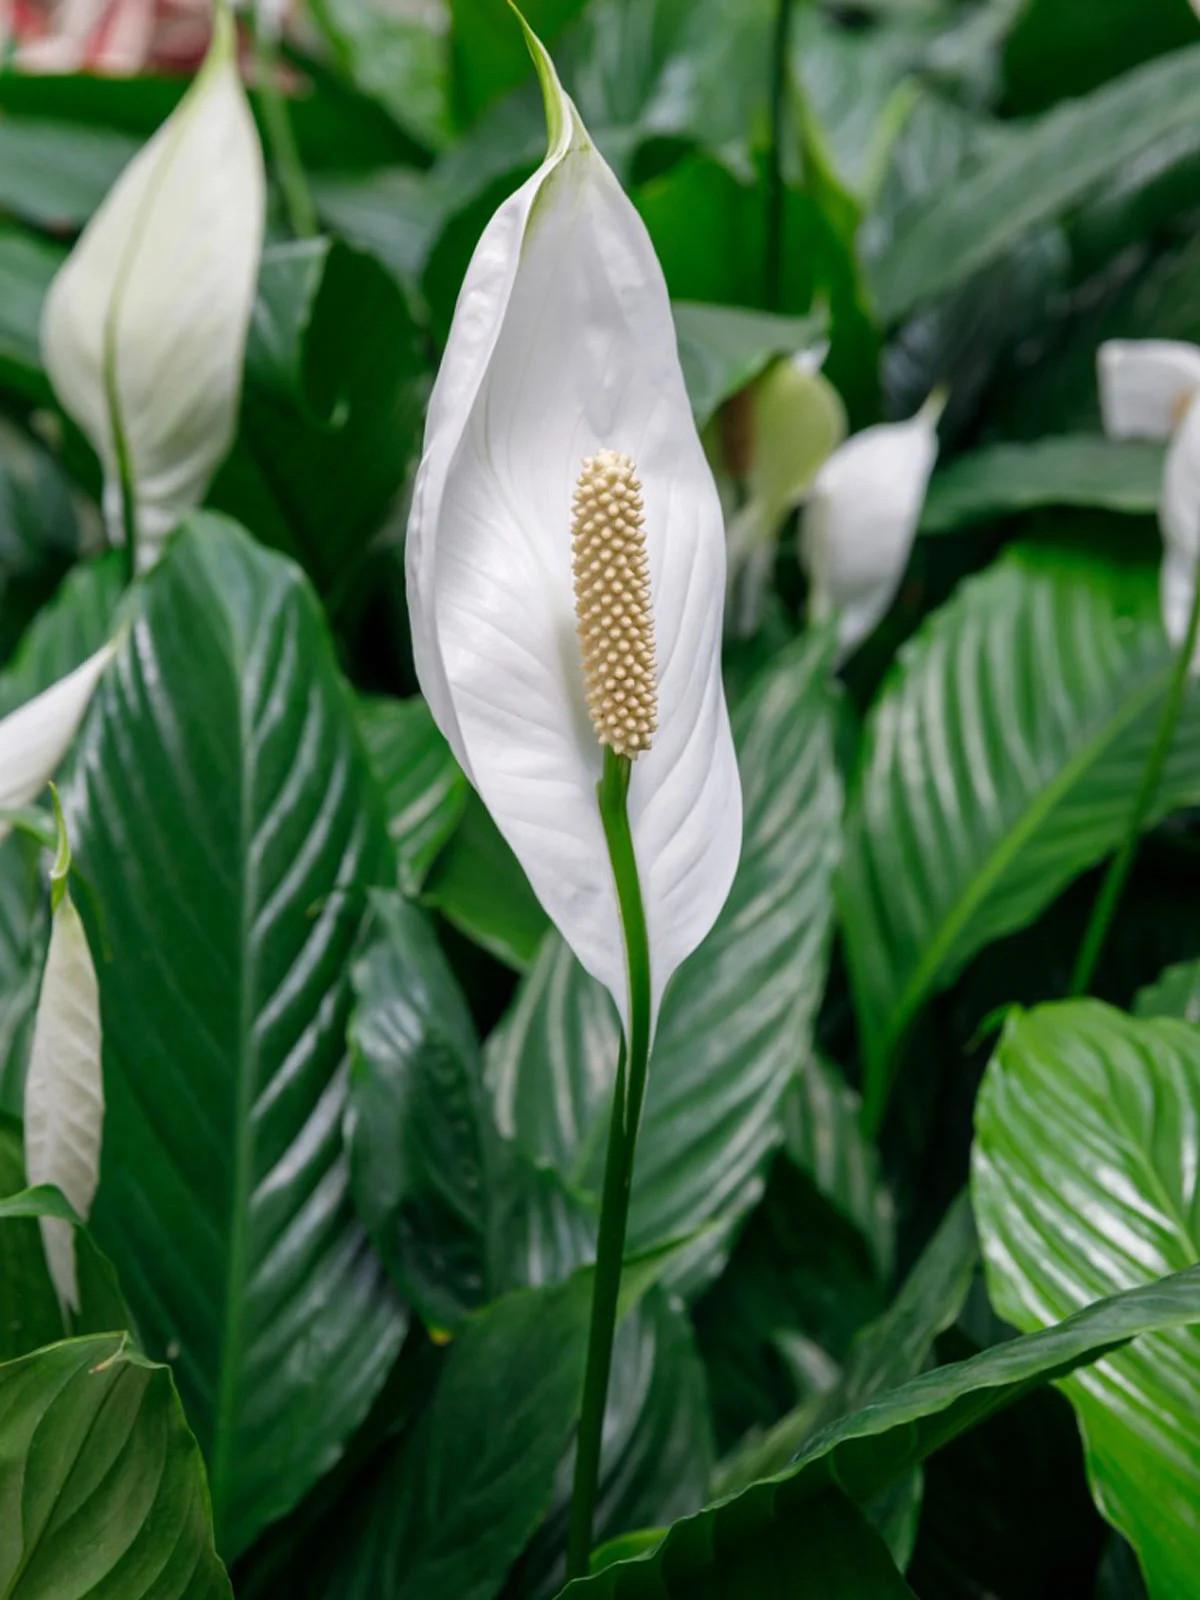 A color photo of a white peace lily blossom and green leaves.